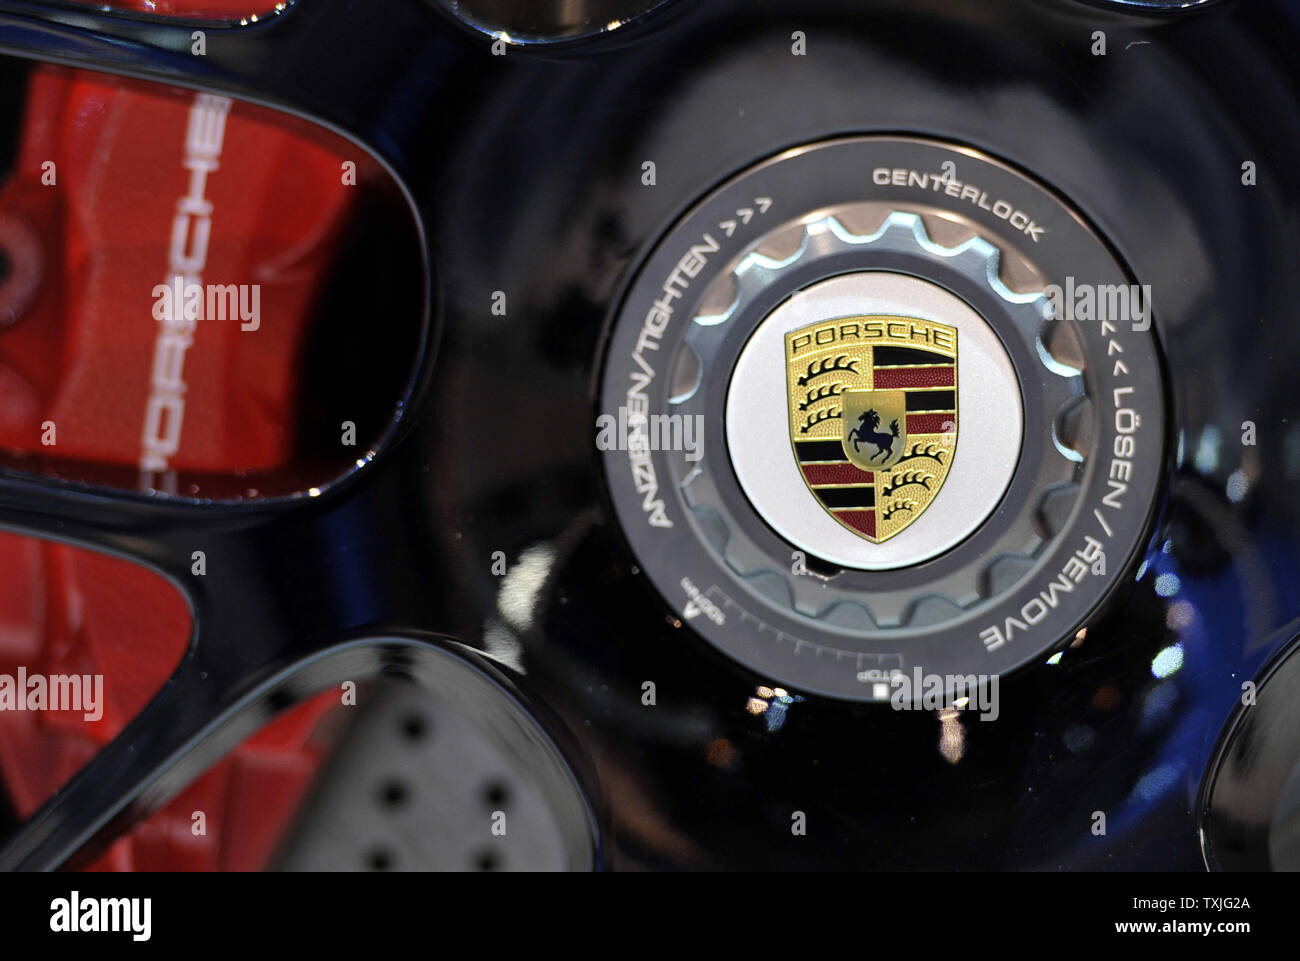 The logo for Porsche is displayed on the wheel of a 2011 911 Carrera at the Chicago Auto Show at McCormick Place in Chicago on February 9, 2011.    UPI/Brian Kersey Stock Photo